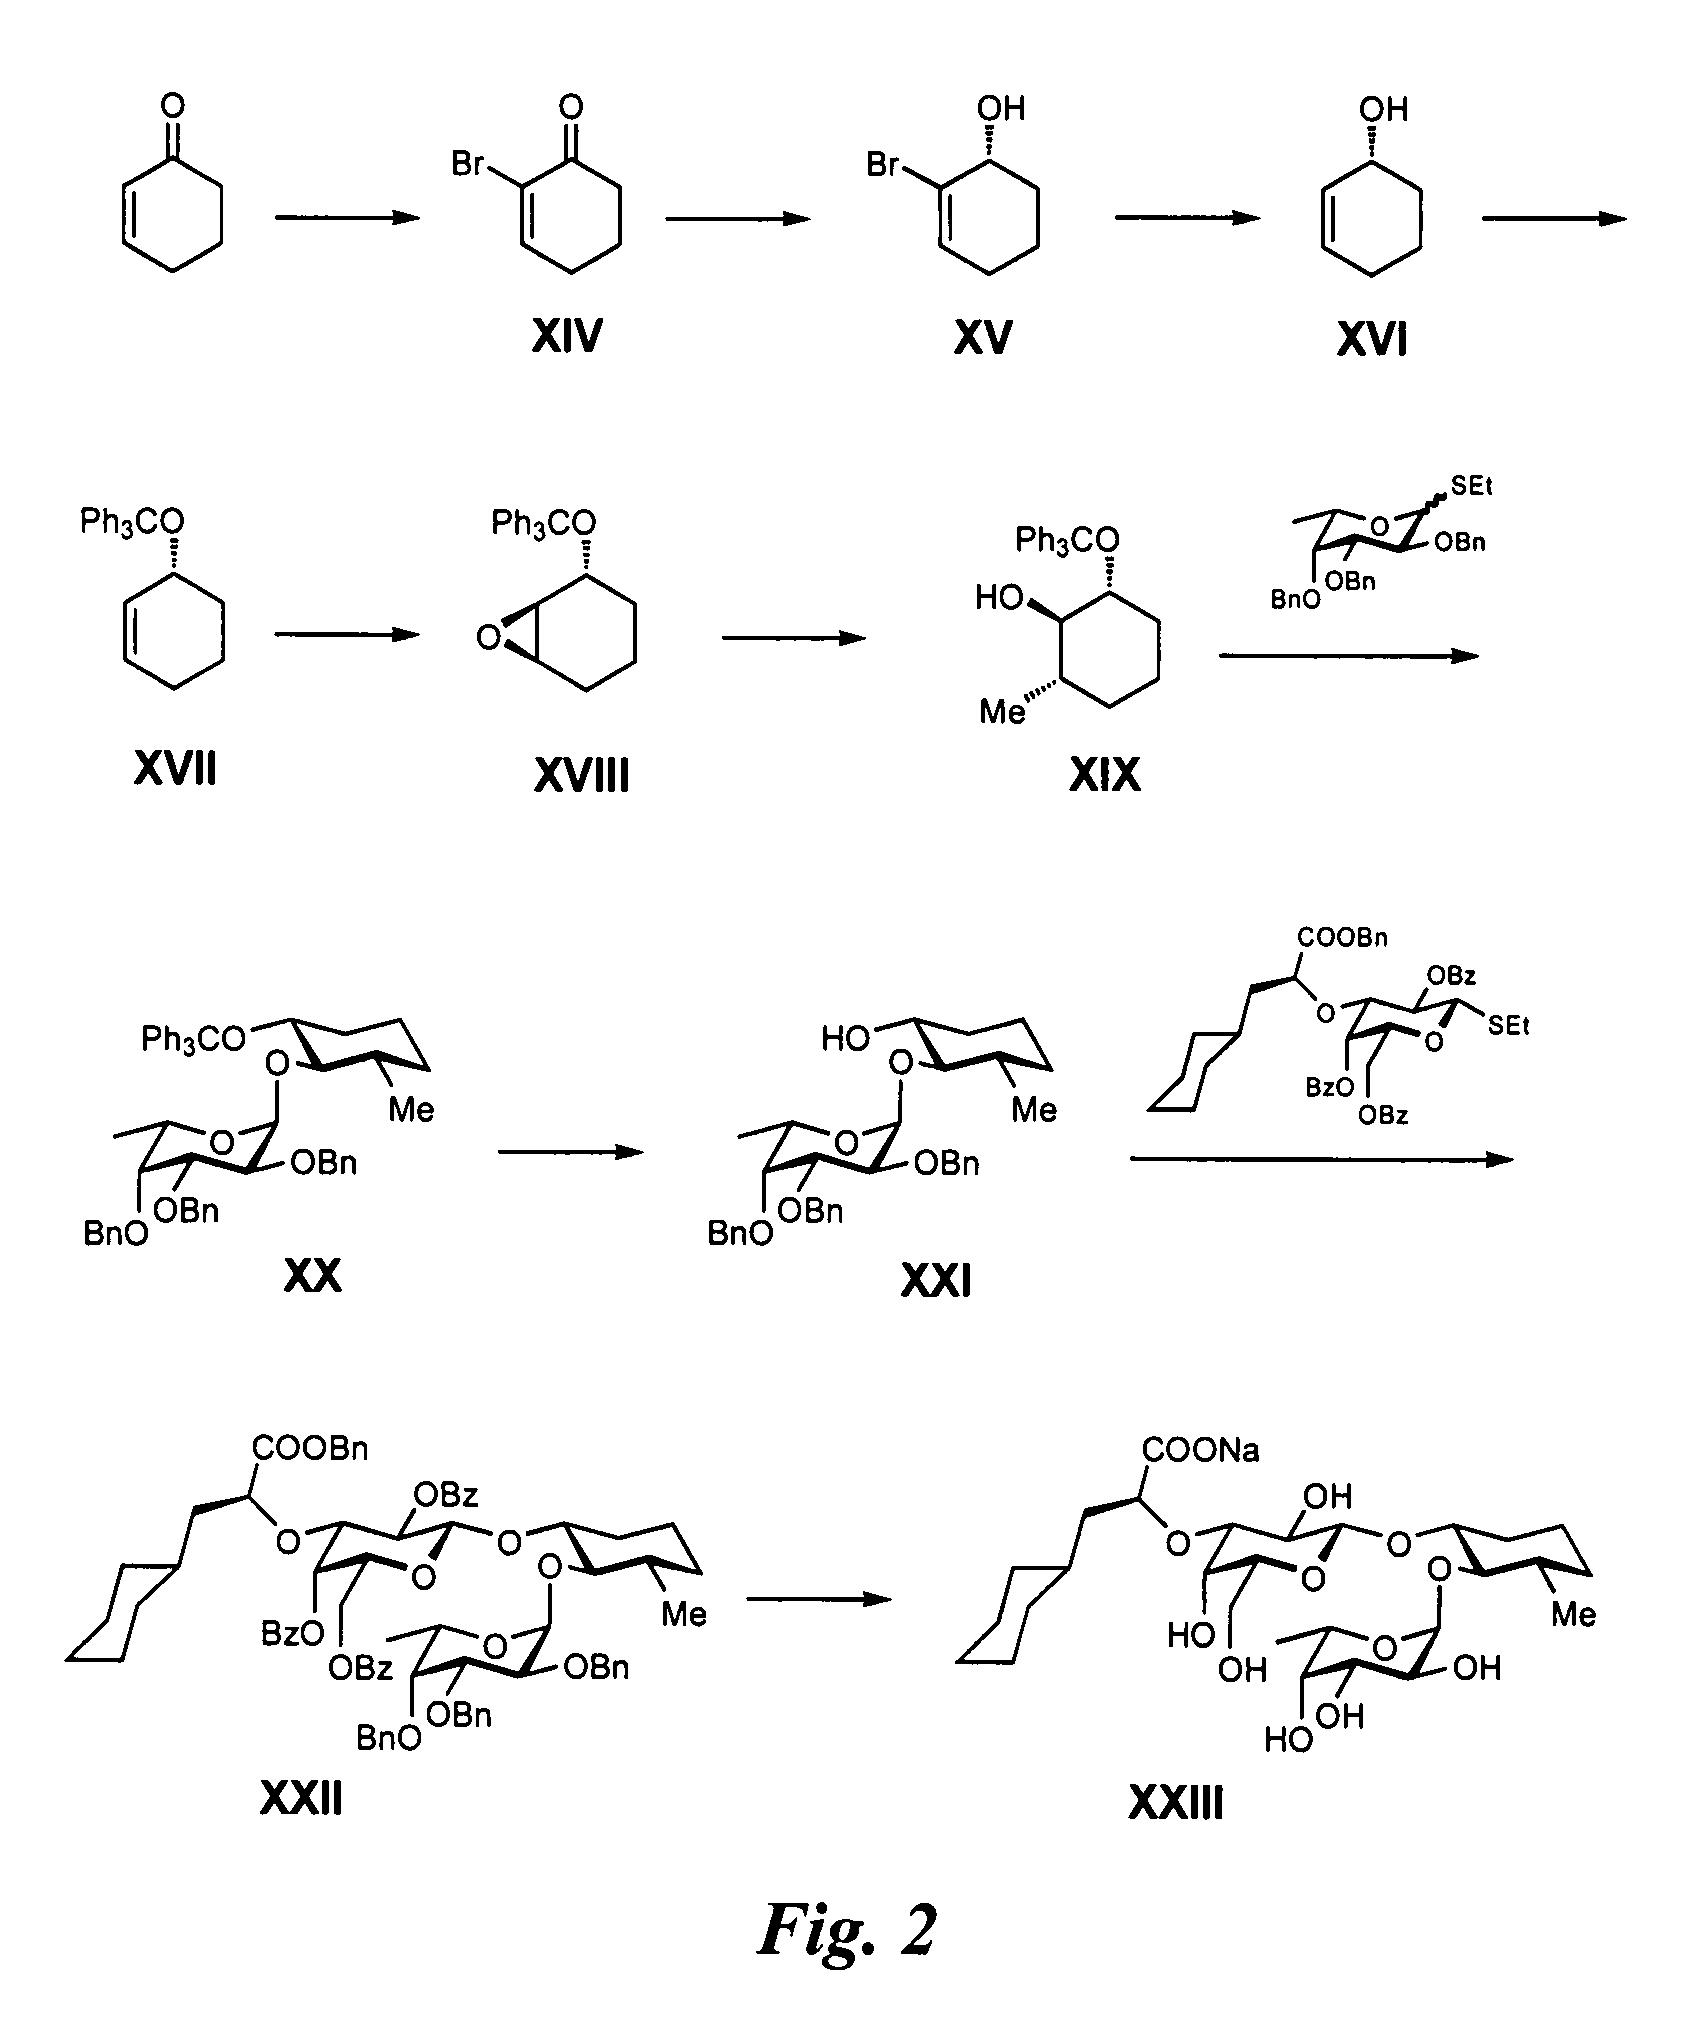 Glycomimetic replacements for hexoses and N-acetyl hexosamines